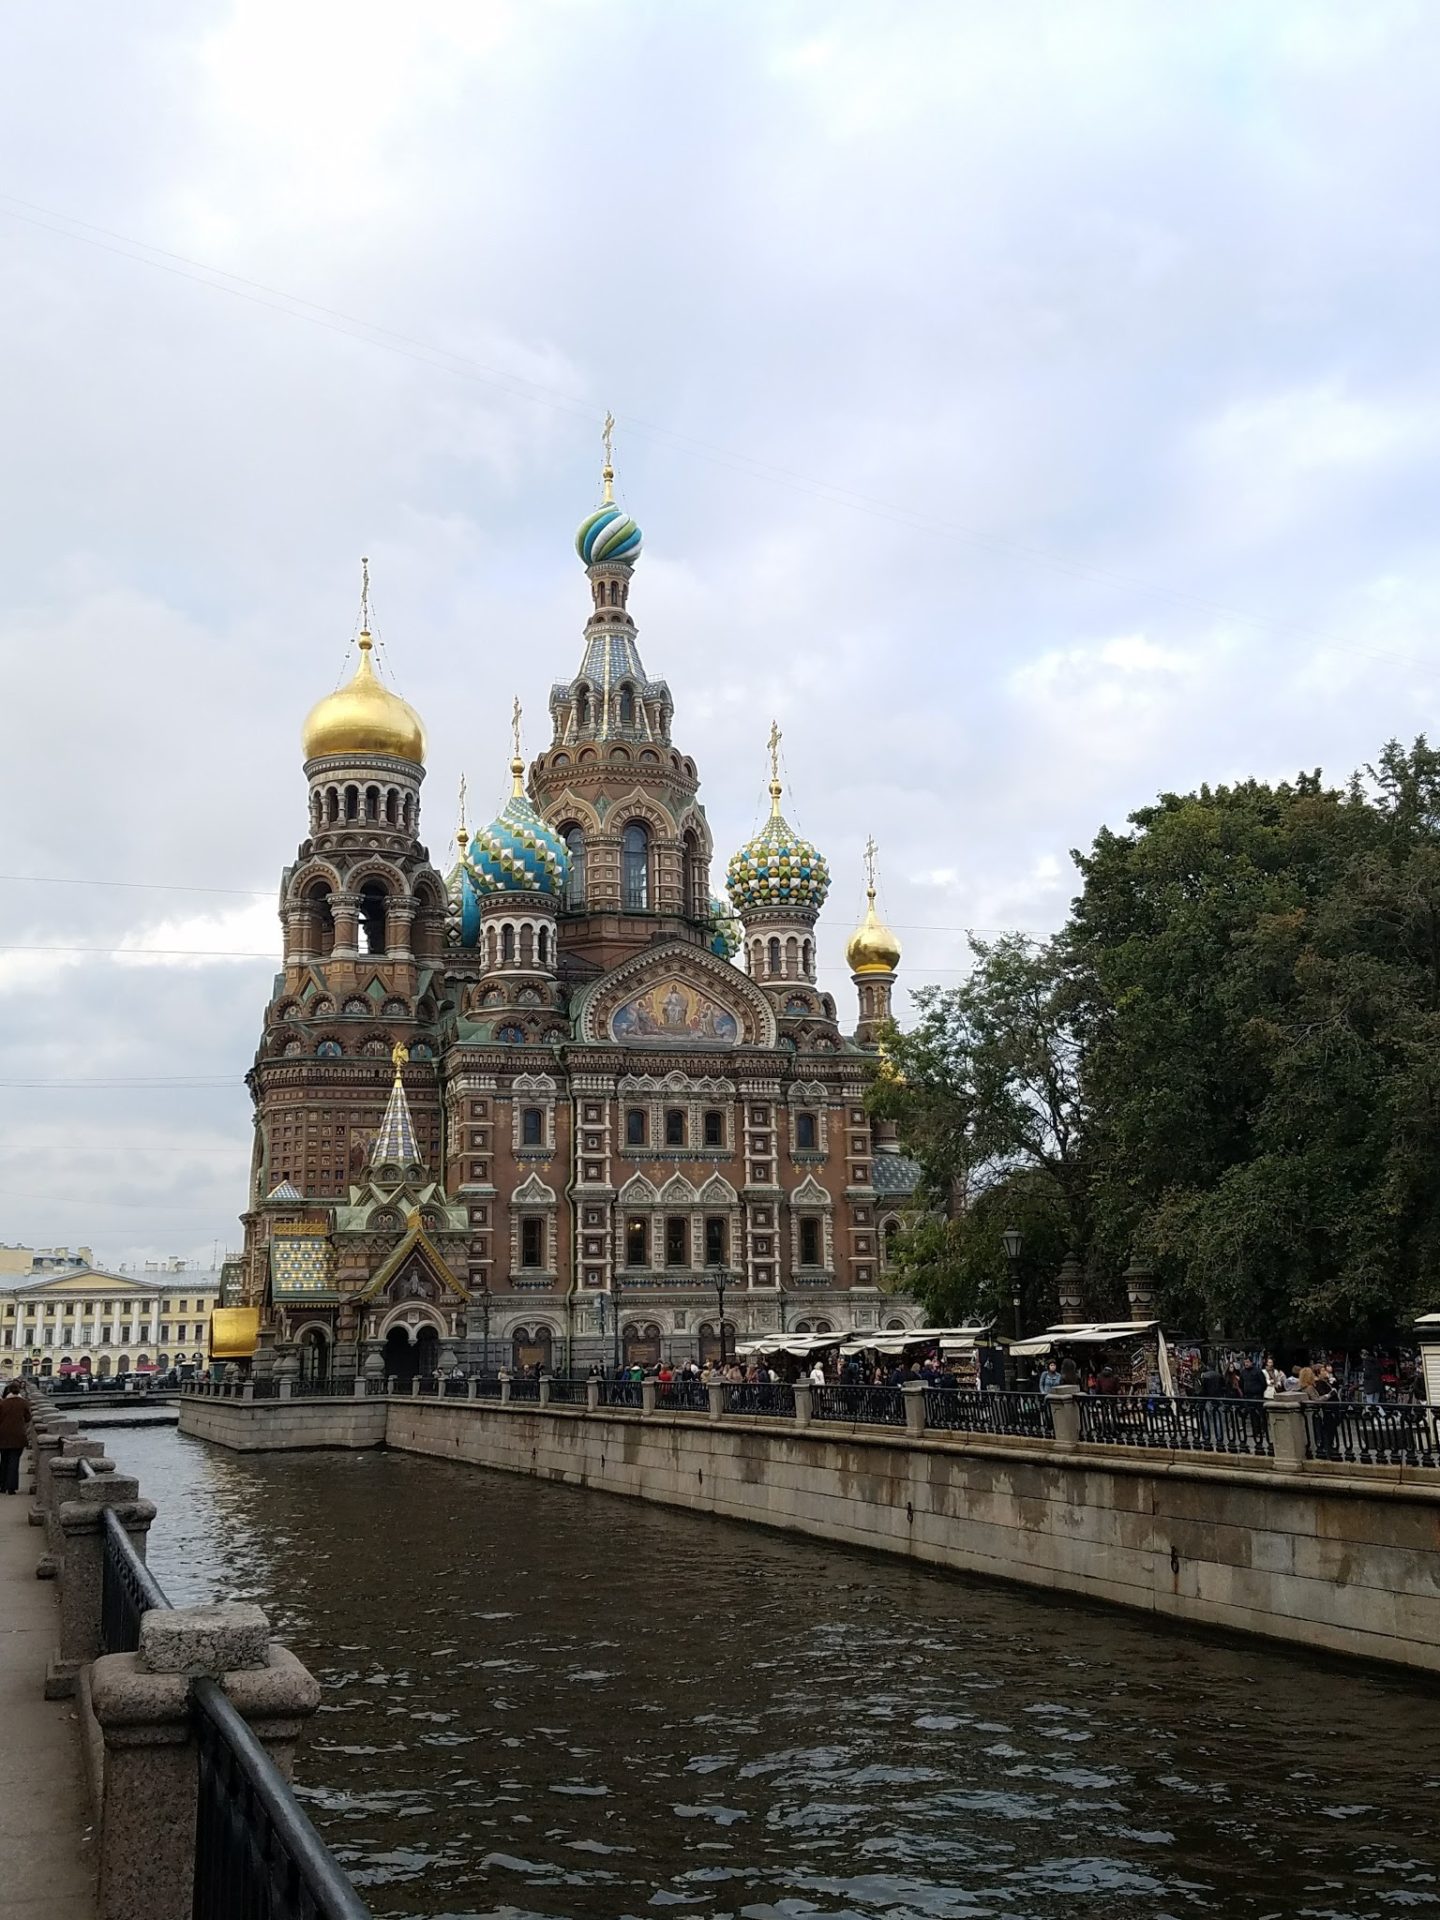 Church of the Savior on Blood with many domes and a canal